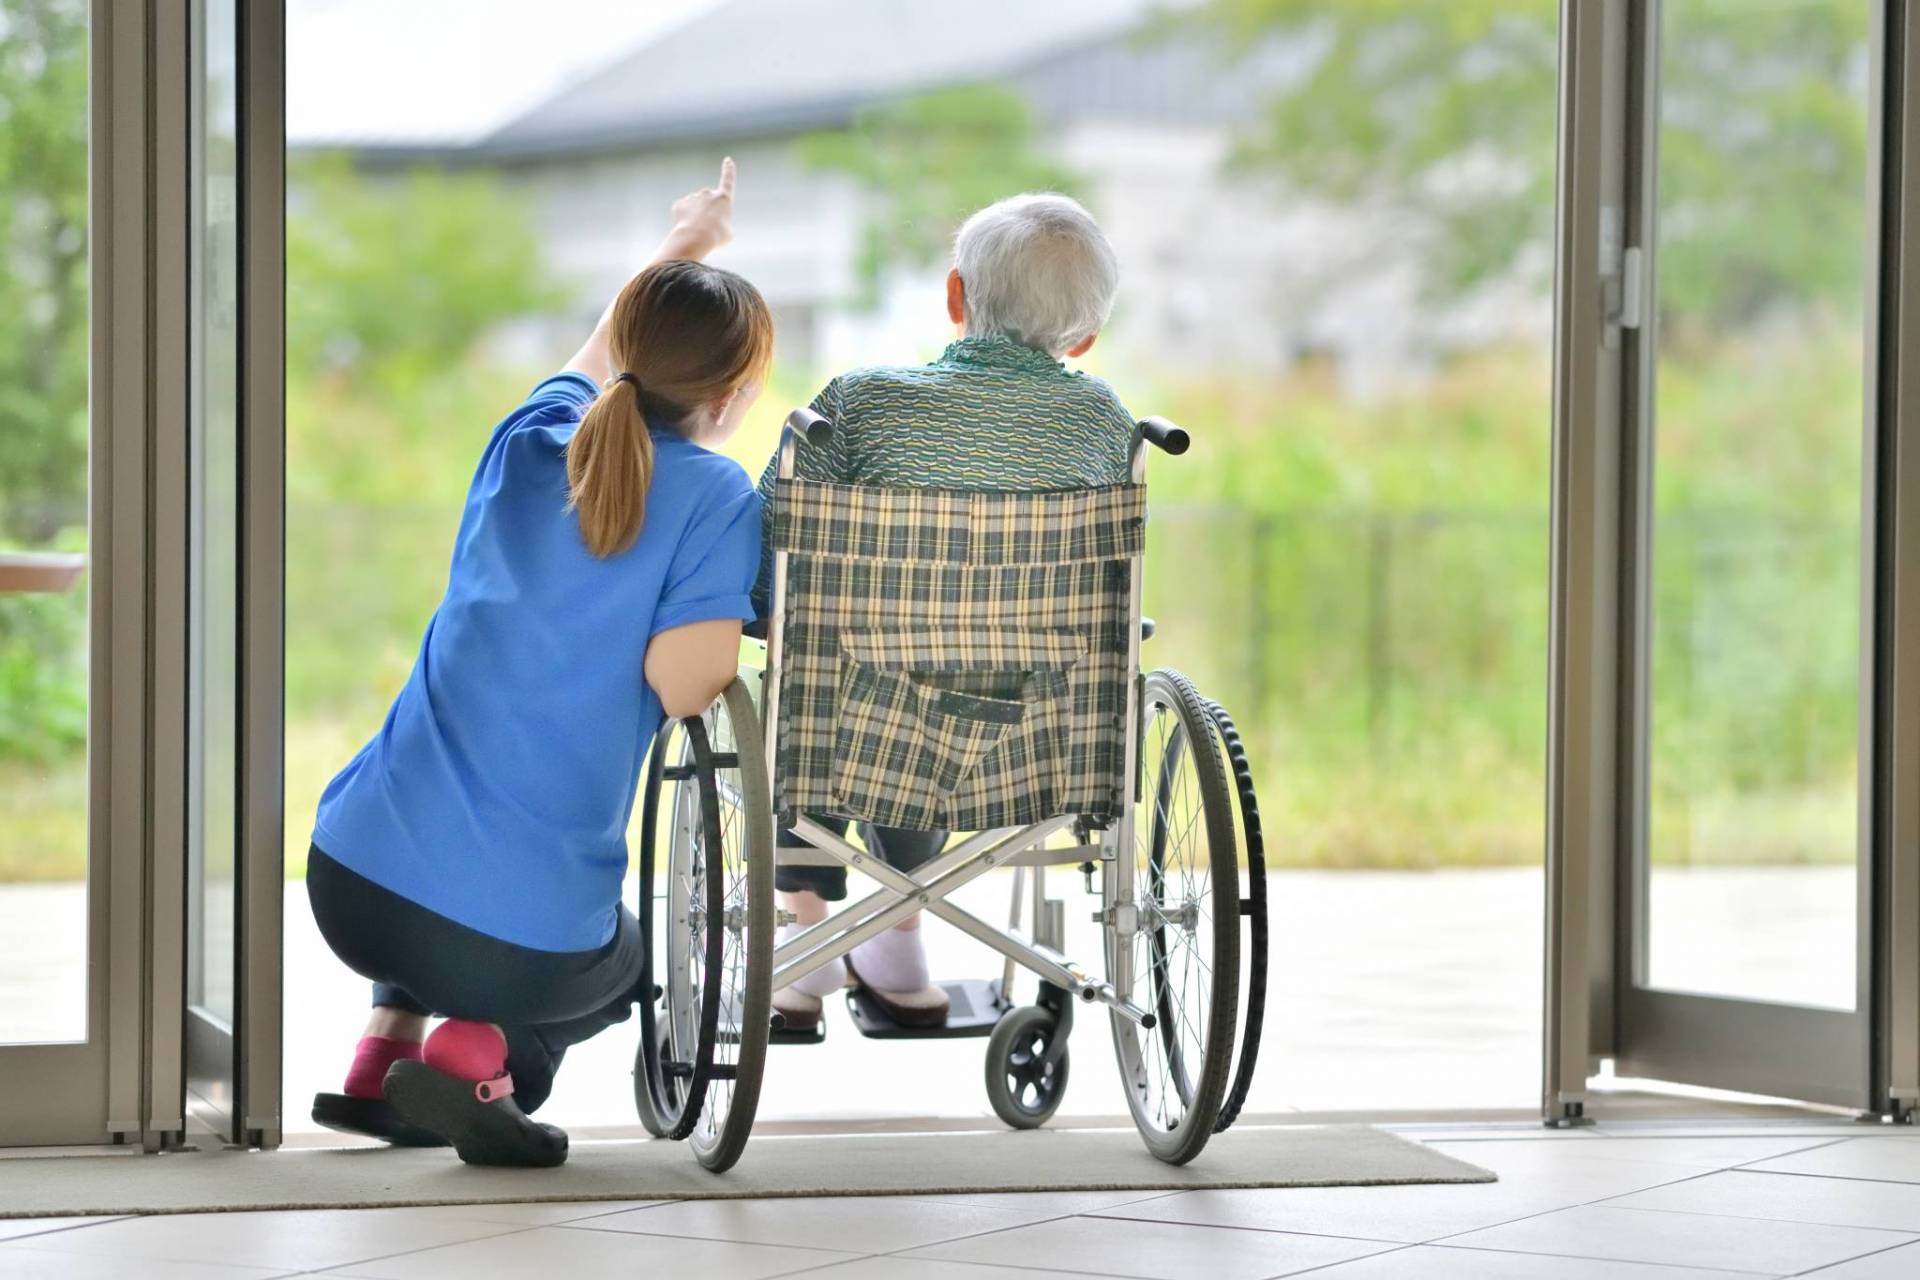 TriCare Aged Care Locations UMG resident on wheelchair